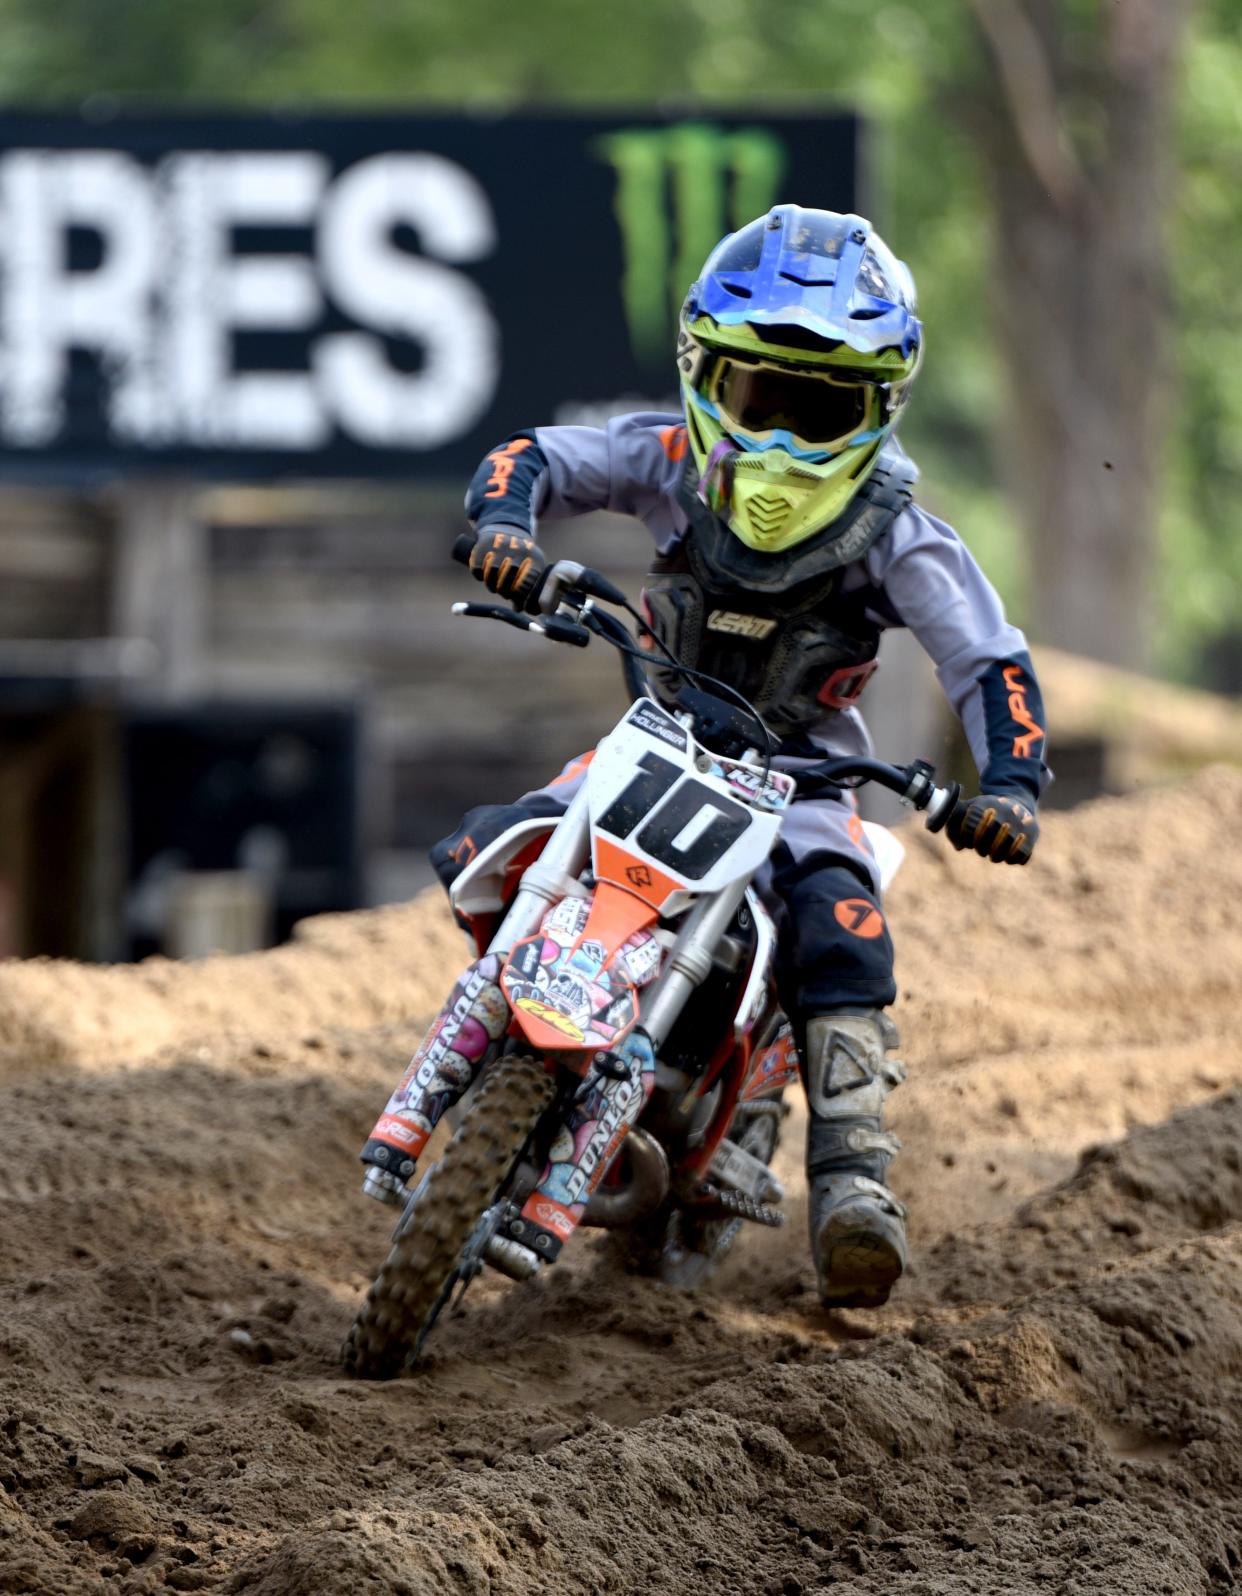 Bryce Hollinger, 6, of Marlboro Township, will compete at the 2023 AMA Amateur National Motocross Championship at Loretta Lynn’s Ranch in Hurricane Mills, Tennessee. The competition begins July 31 and ends Aug. 5. Hollinger is scheduled to race three times, on Aug. 1, Aug. 3 and Aug. 4 in his age group.